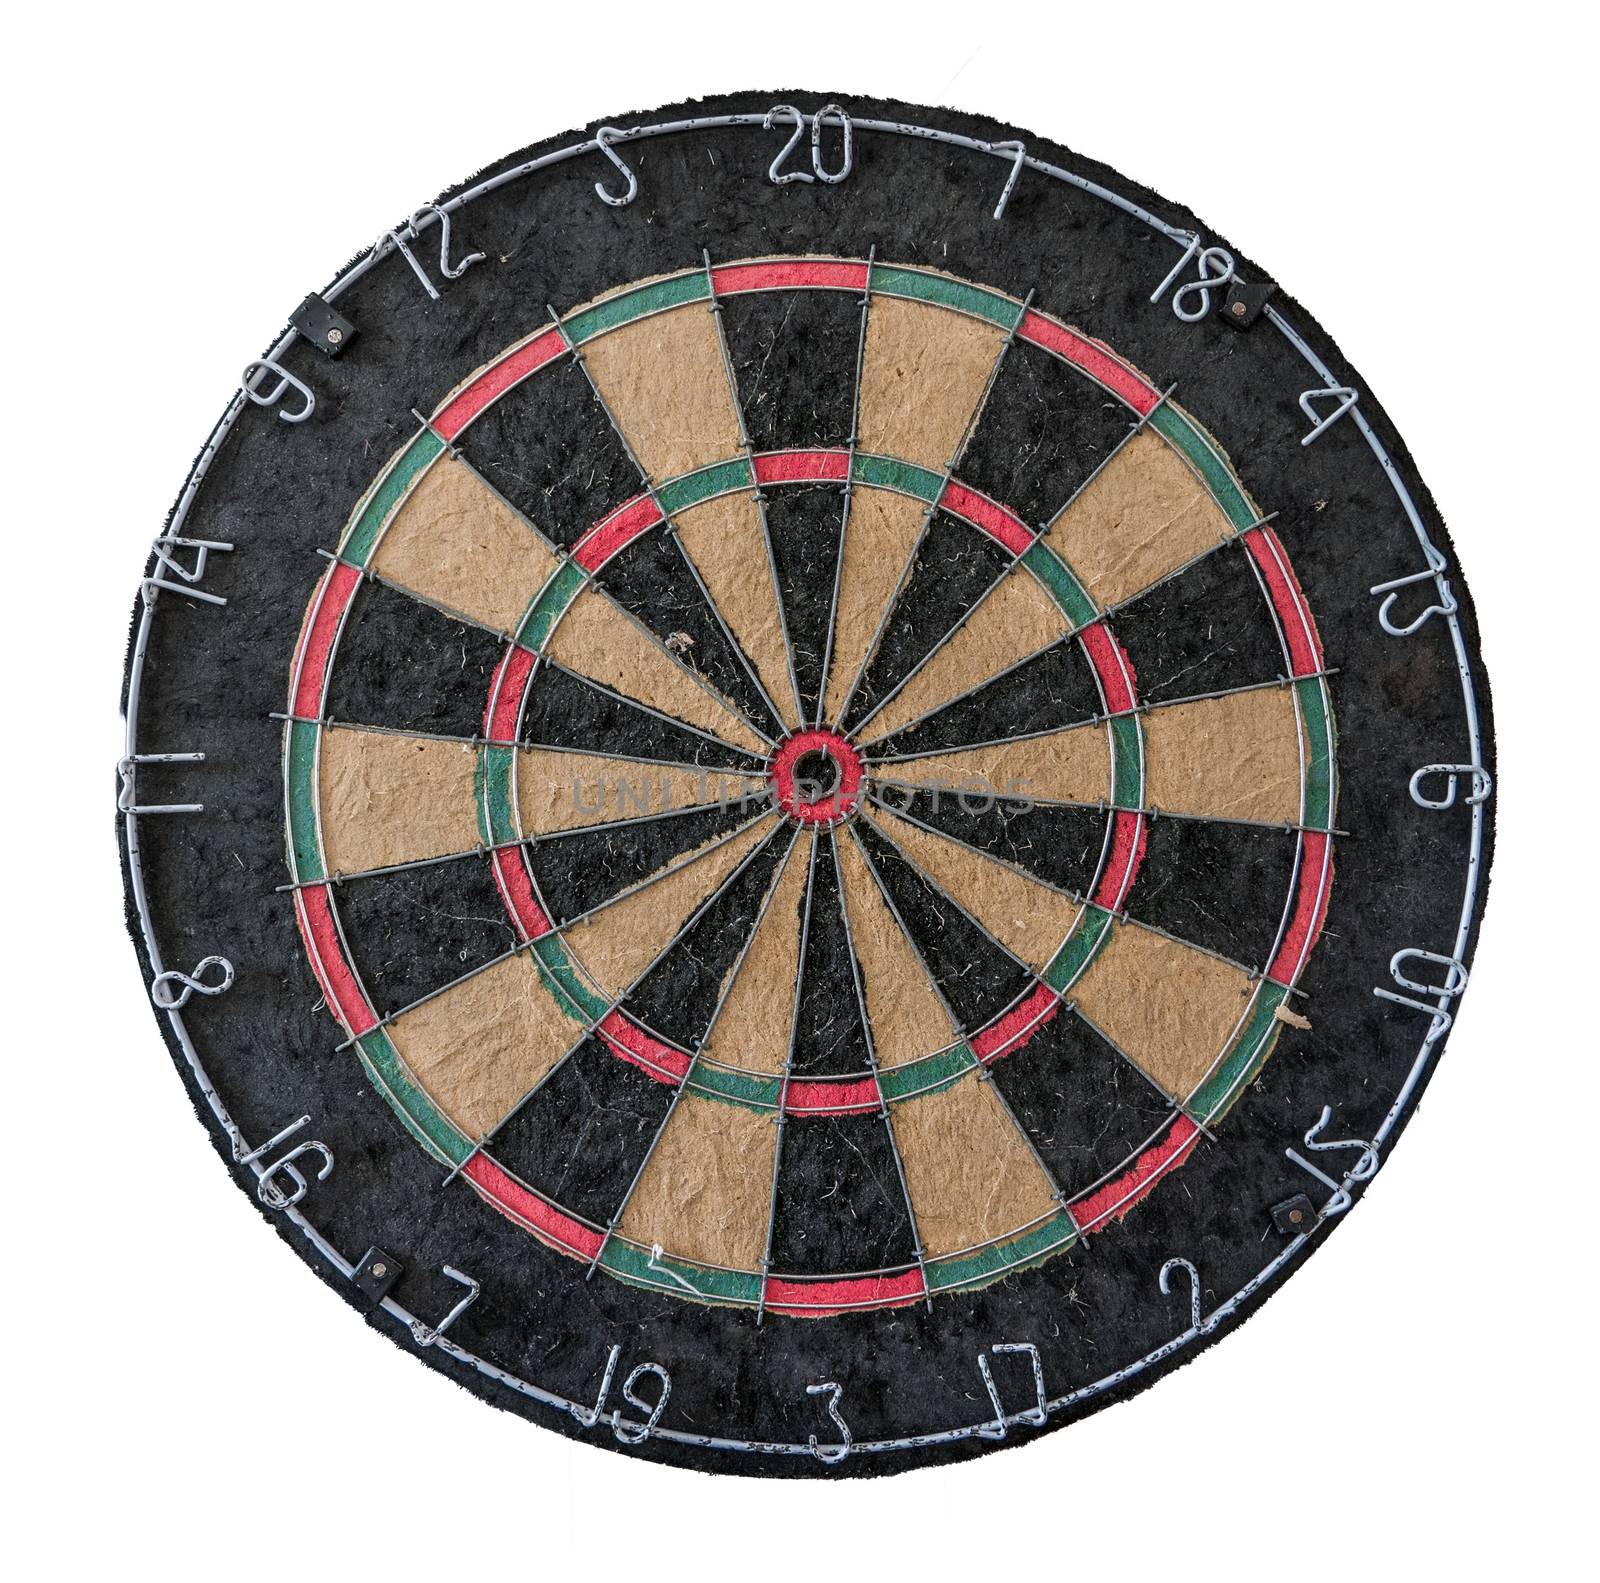 An Old Grungy Dart Board On A White Background